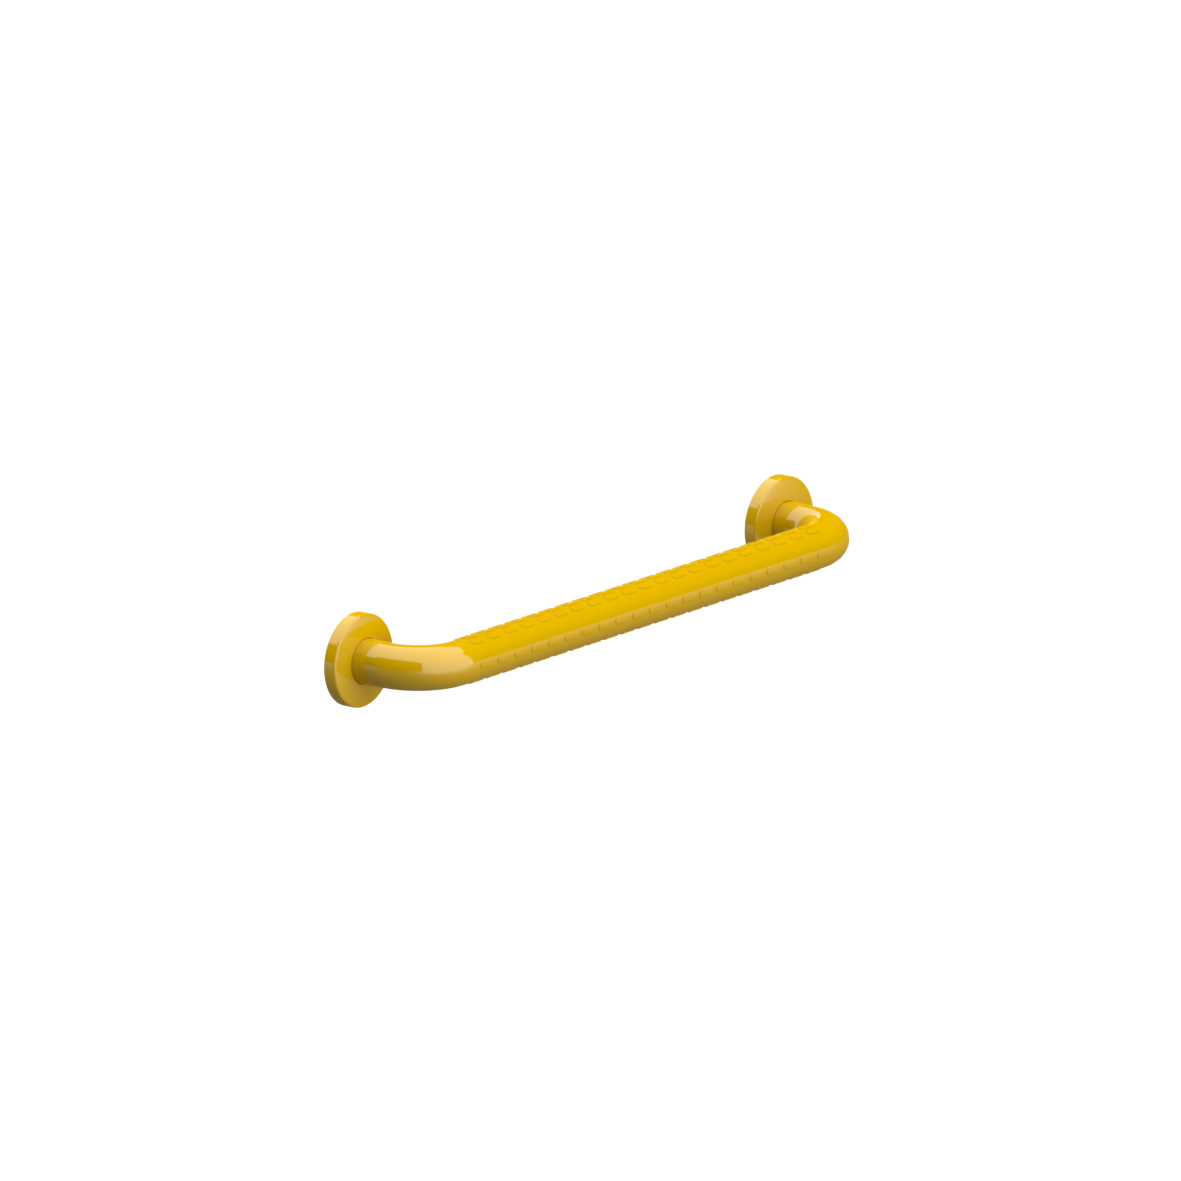 Nylon Care 400 Grab bar, single piece, left and right, 500 mm, Yellow